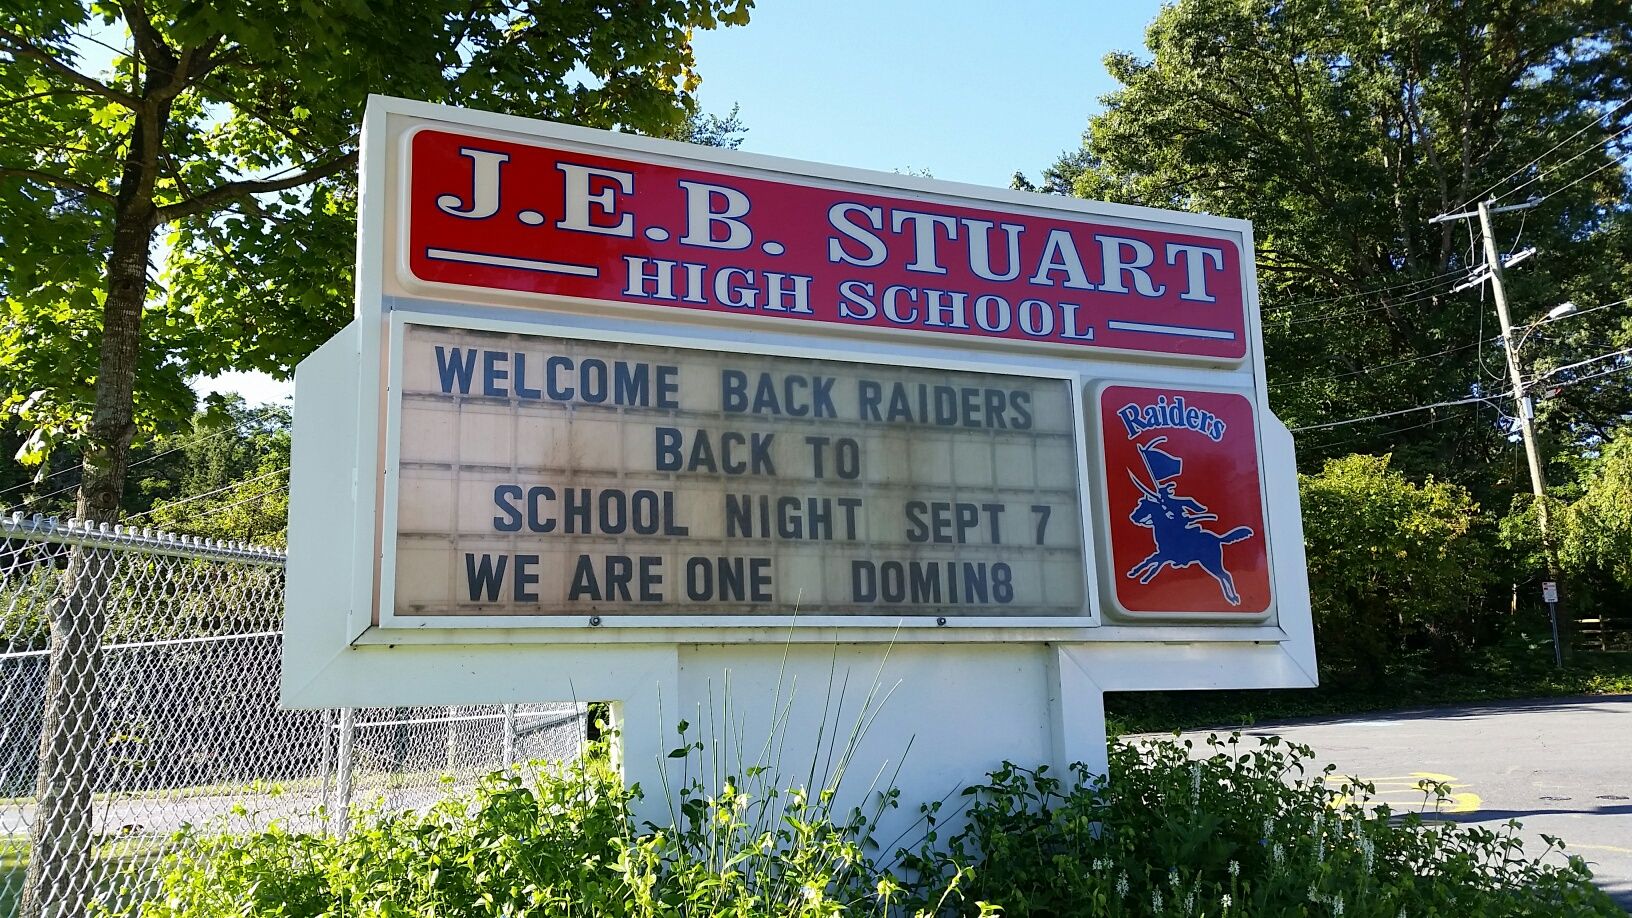 On Saturday, Sept. 9, residents weighed in on what they want the school to be renamed. (WTOP/Kathy Stewart)